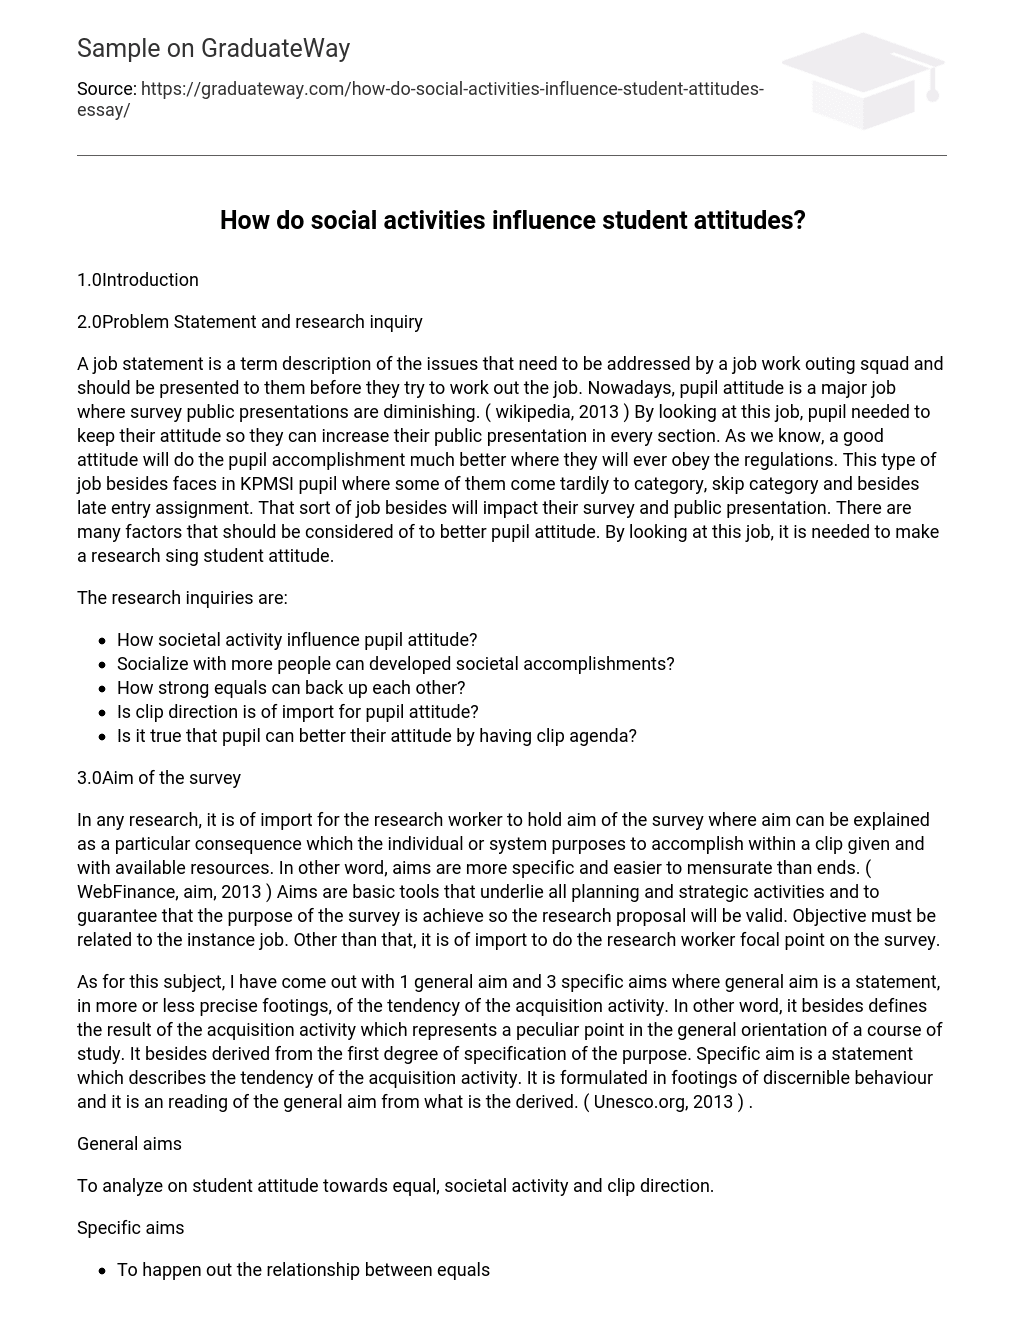 How do social activities influence student attitudes?